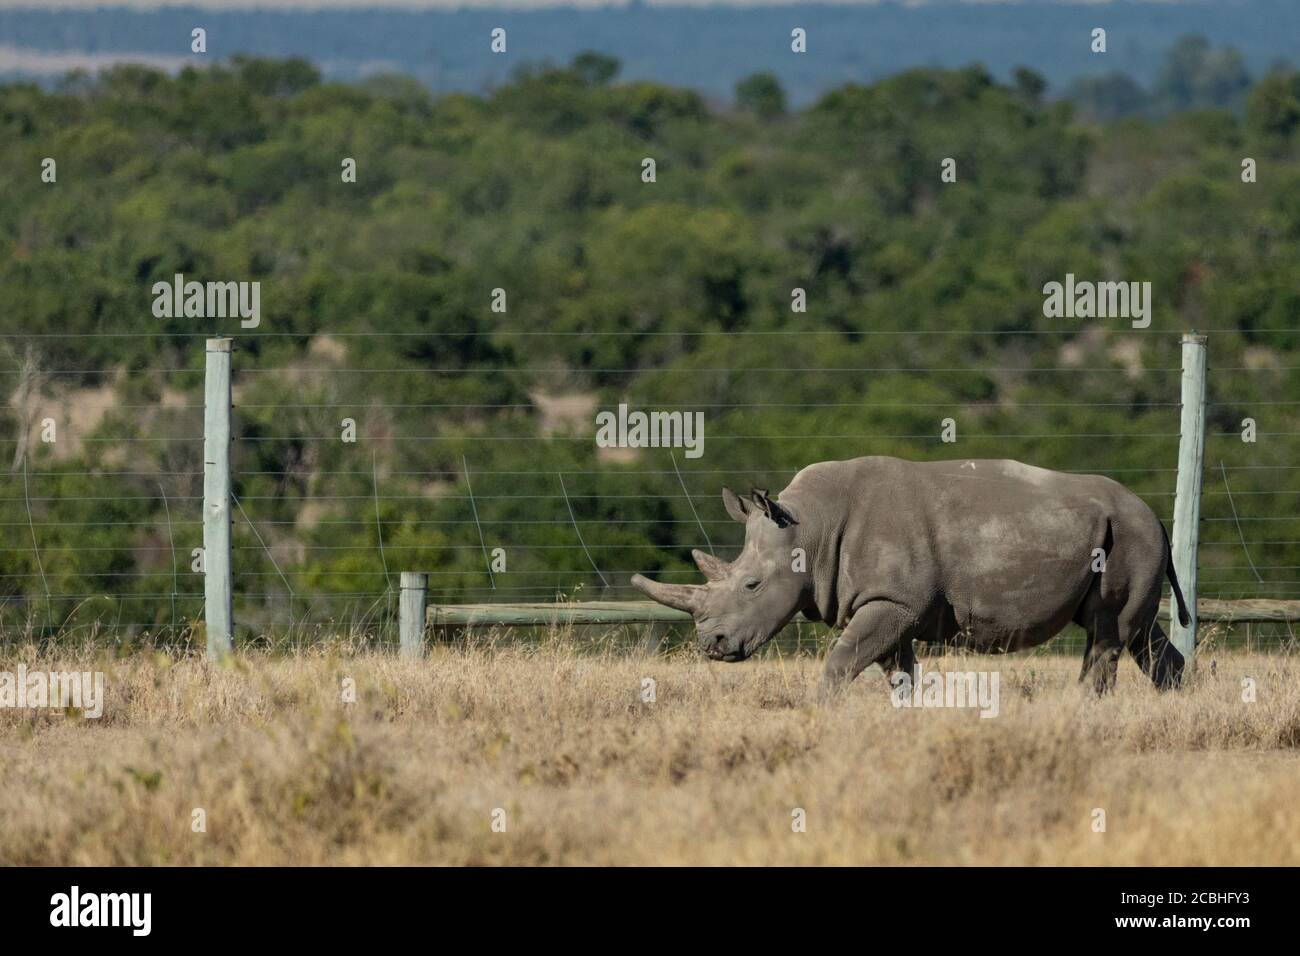 Very rare and highly endangered northern white rhino with large and blunt horn walking along fence in Ol Pajeta Reserve in Kenya Stock Photo